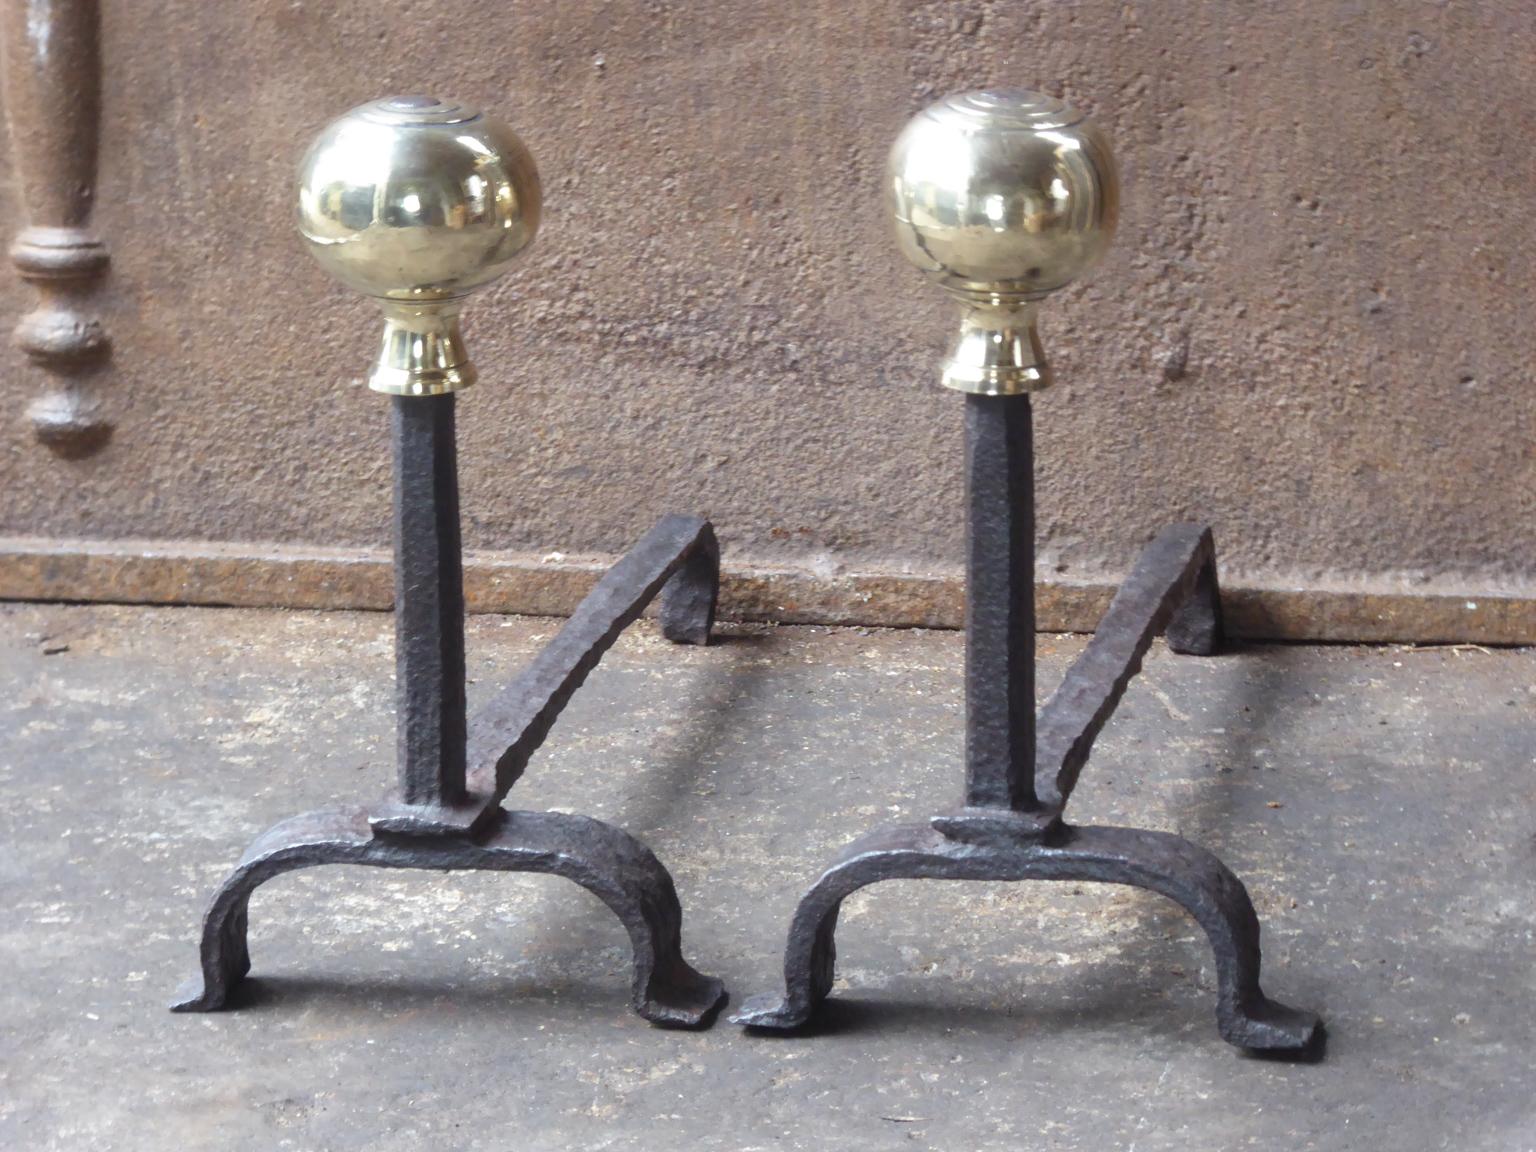 Forged French Louis XIV Period Andirons or Firedogs, 17th-18th Century